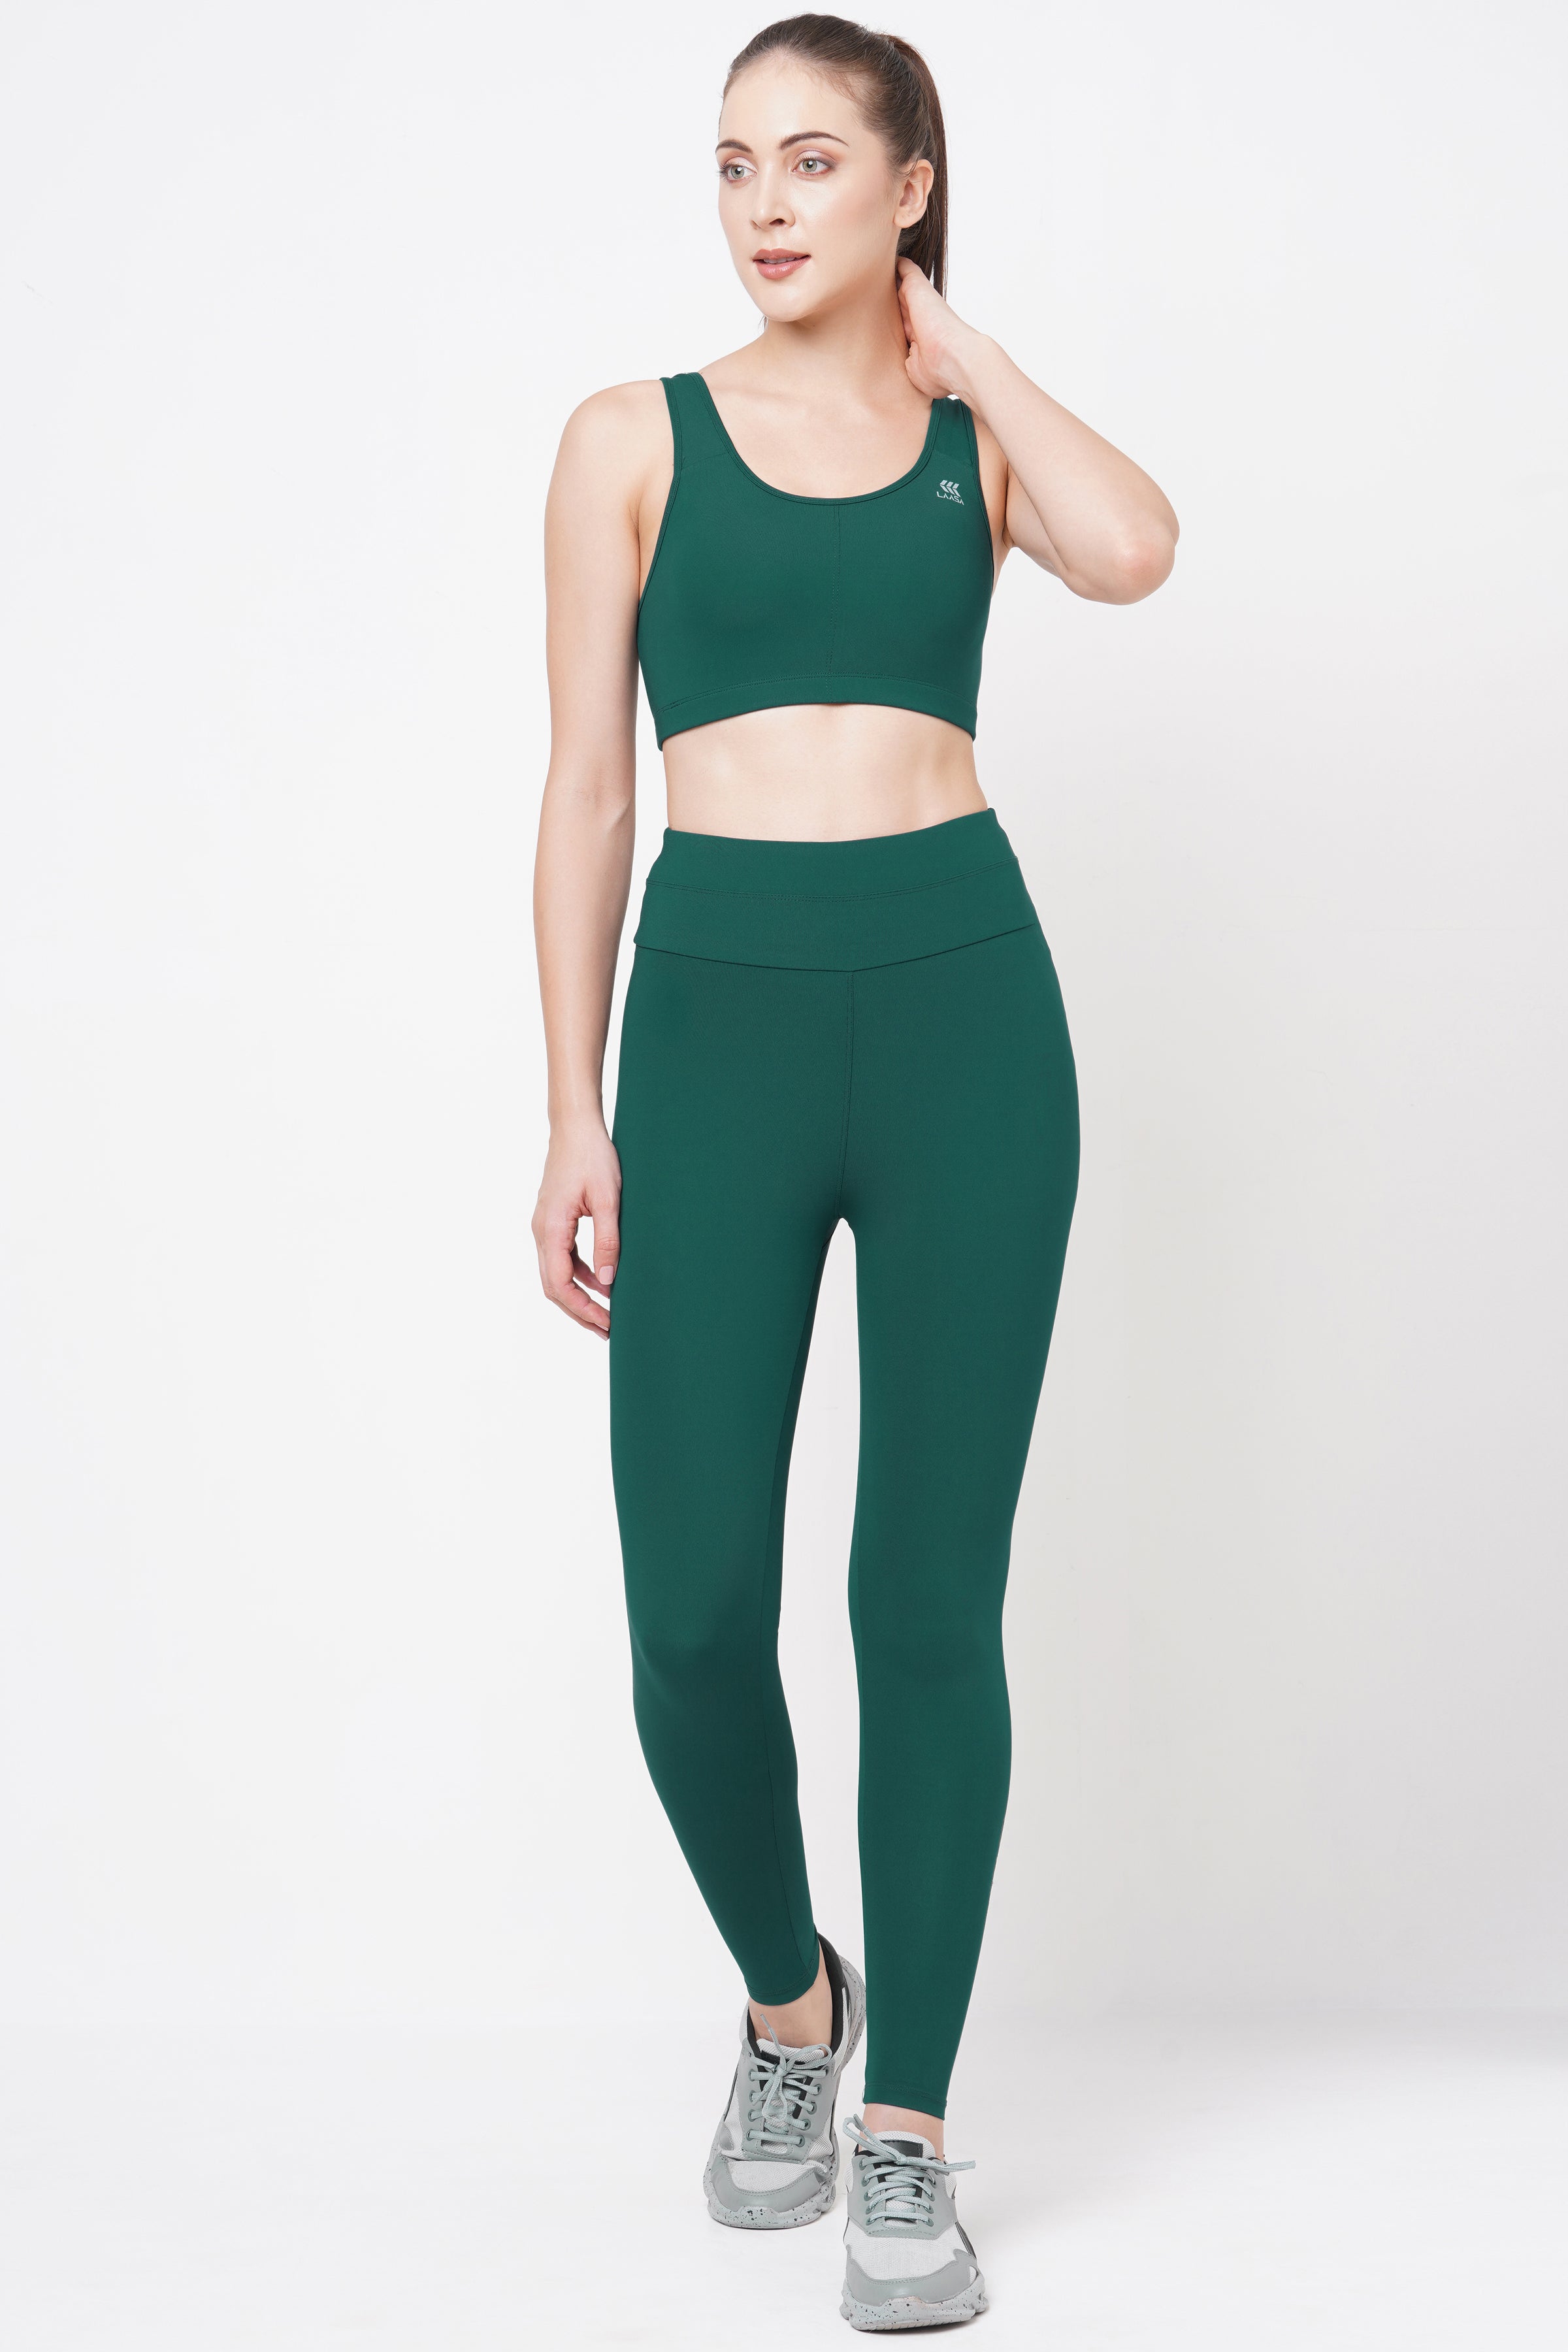 Buy TCG Bio wash 100% pure Cotton with Spandex Light Sea Green Churidar  legging Online at Low Prices in India - Paytmmall.com